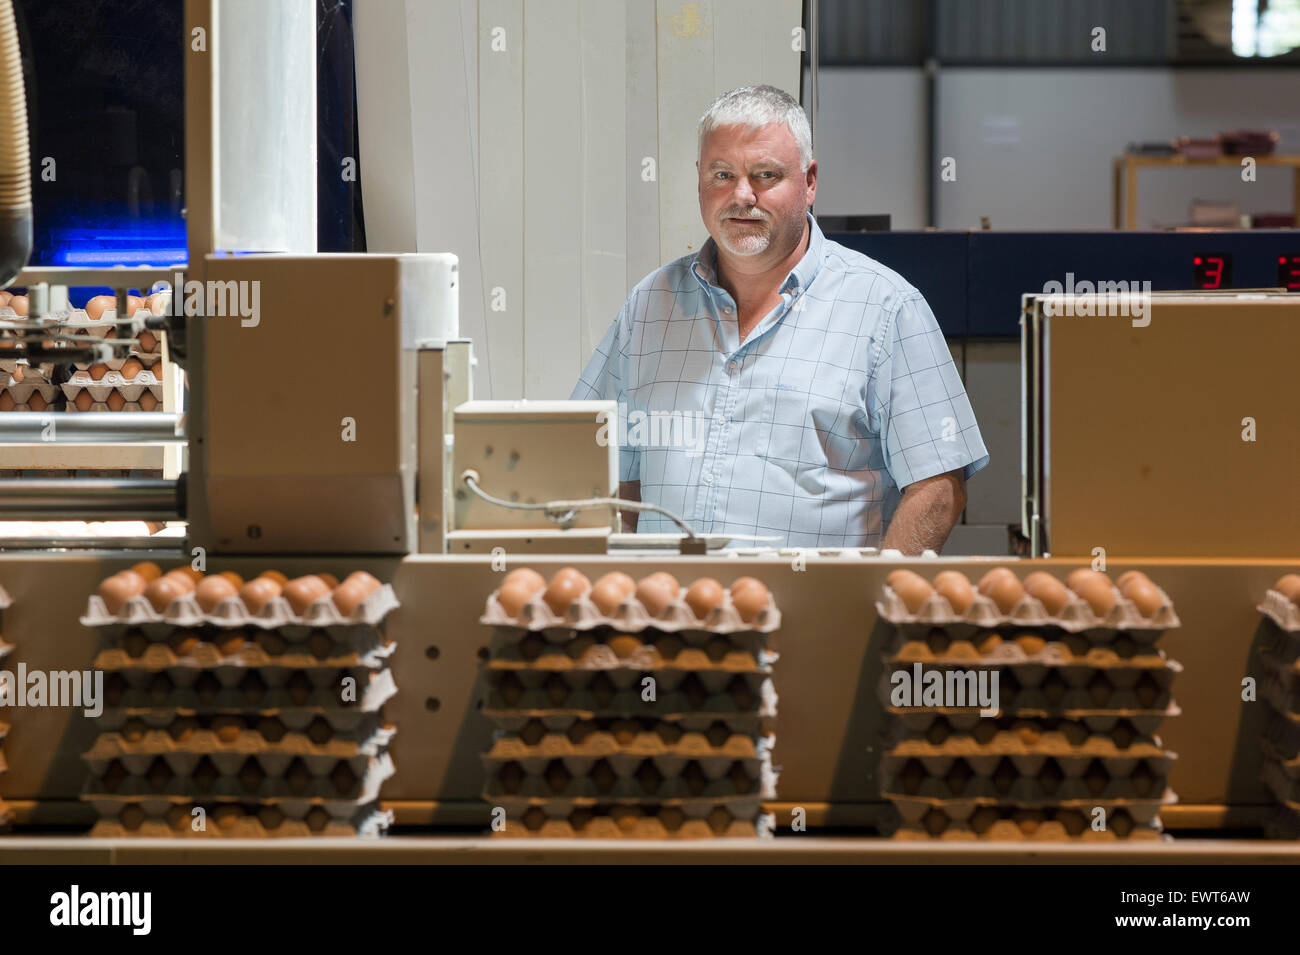 South Africa - Egg farmer in packing line Stock Photo